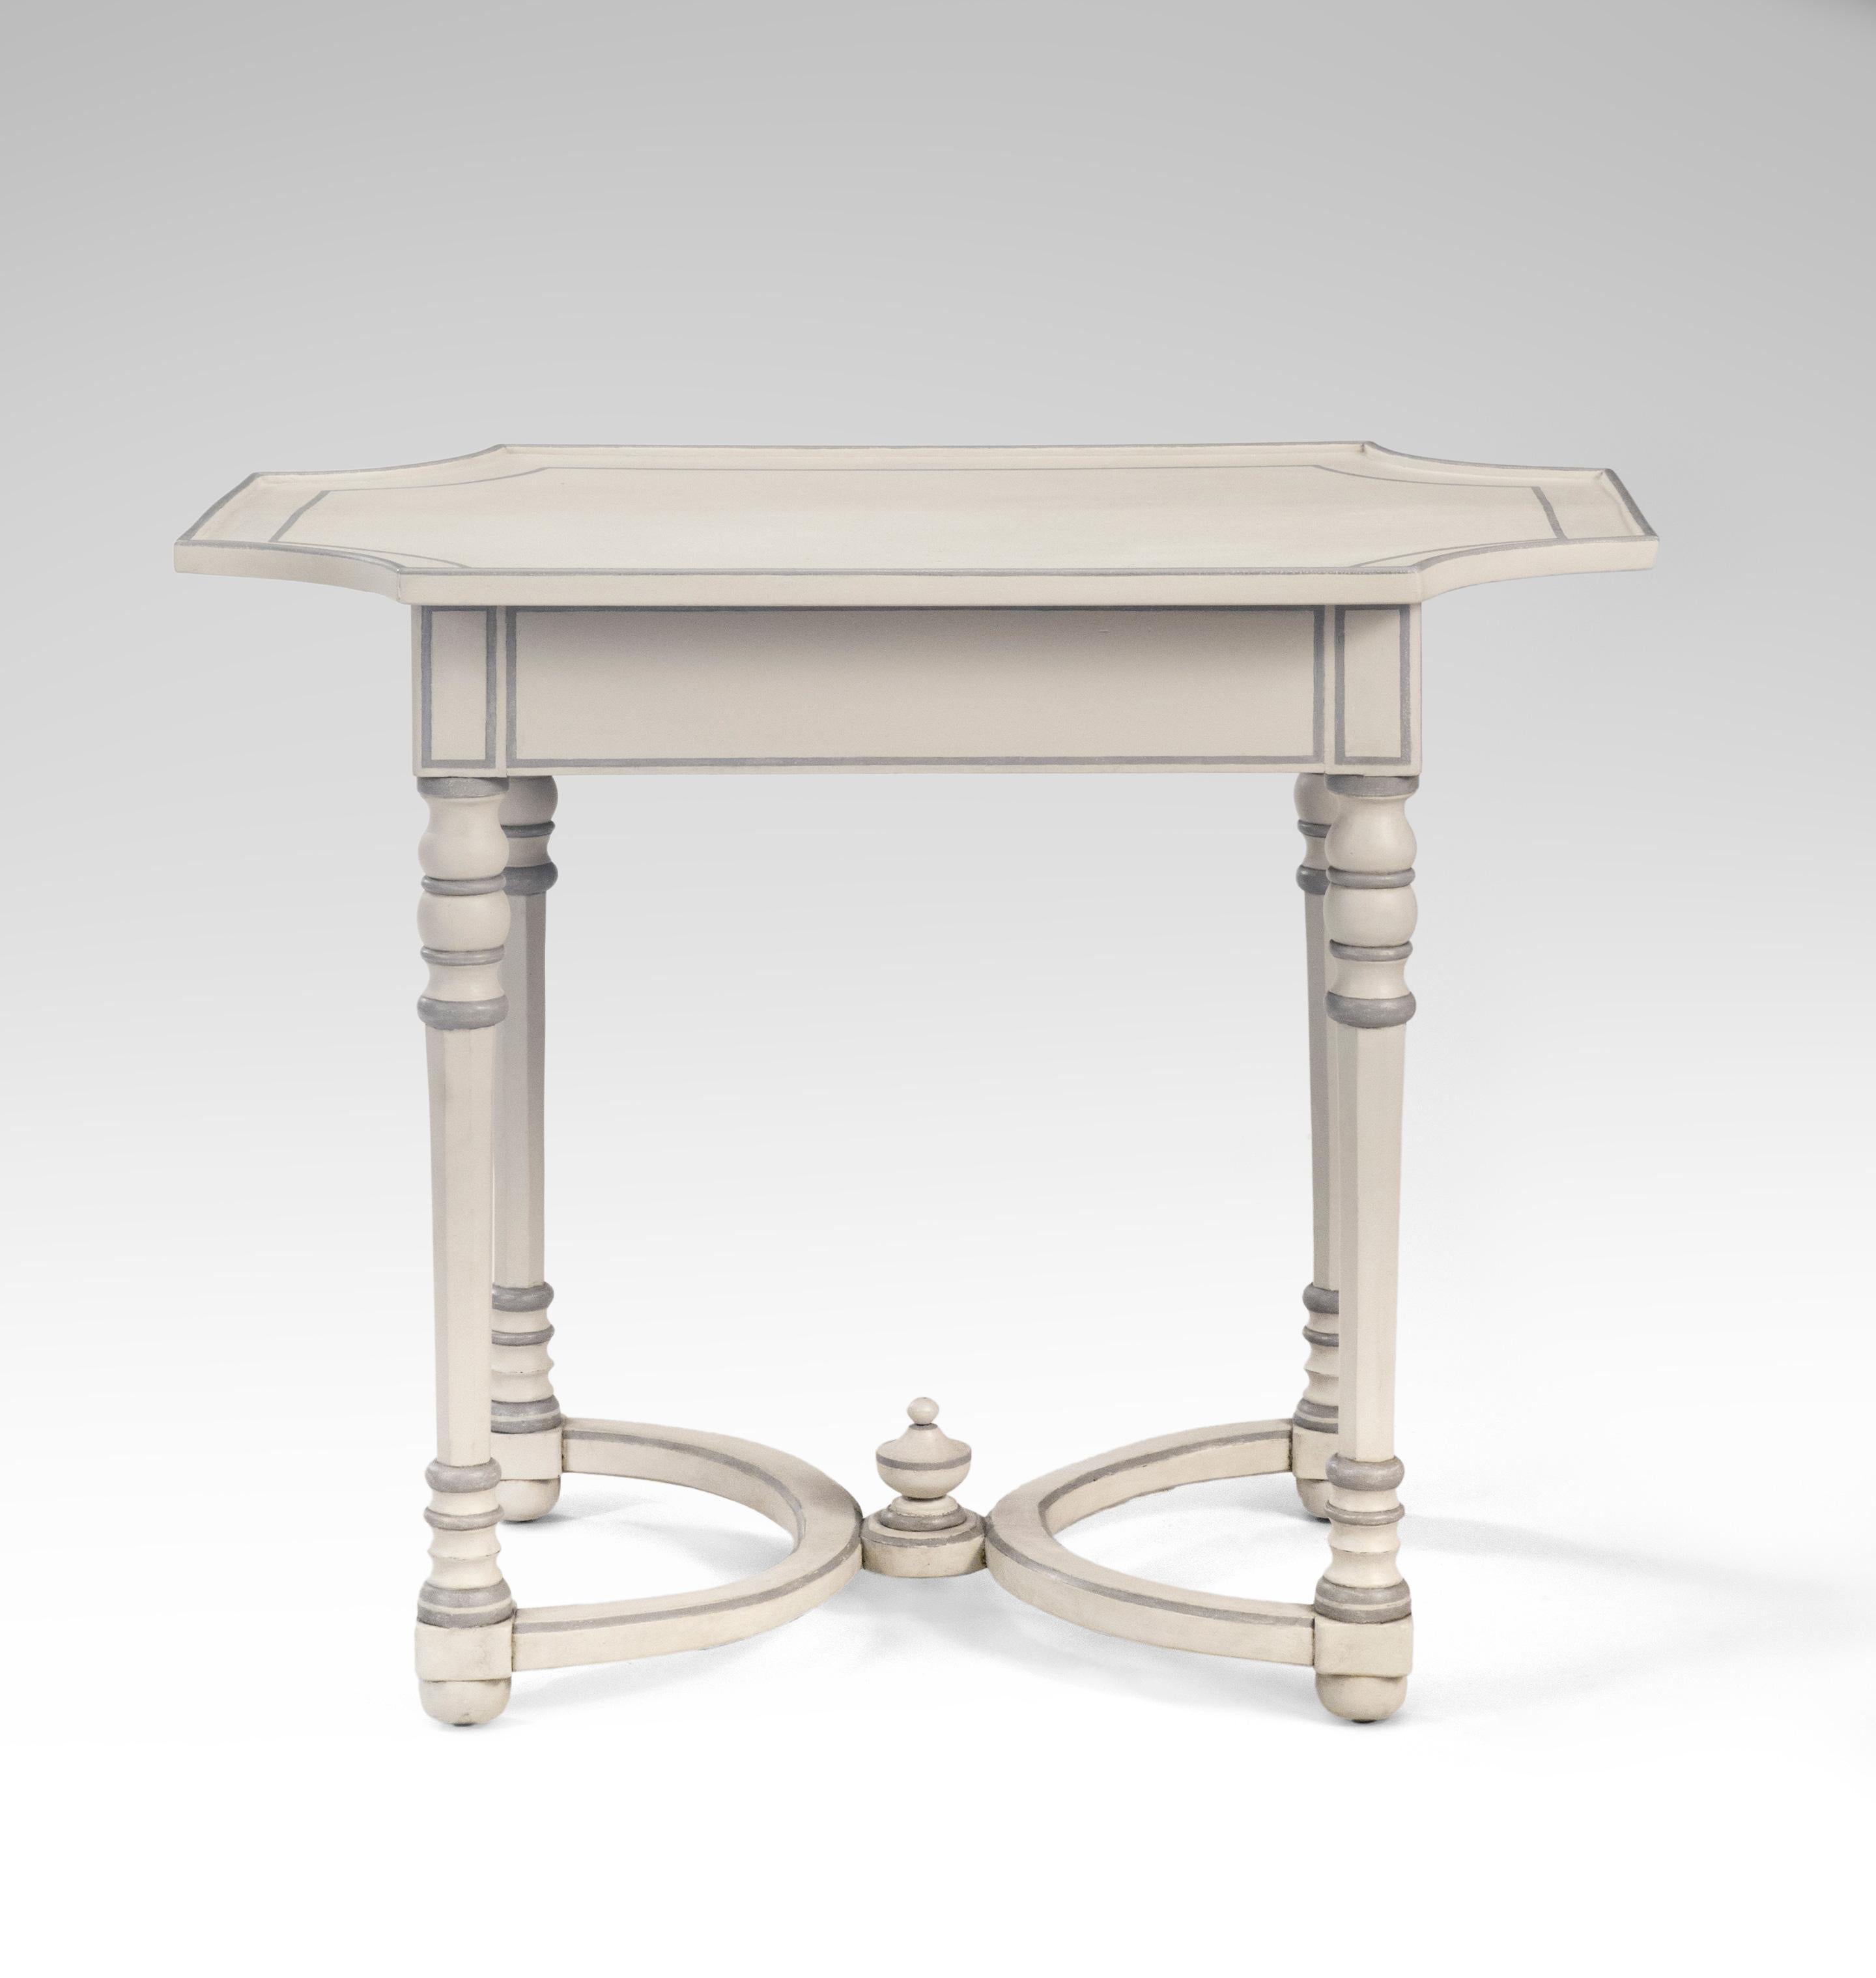 Continental Baroque gray painted table
18th century
Handsome, easy to live with table with an attractively shaped top; the predominate soft gray color accented with a darker gray accent line. The rectangular top with concave corners, above an